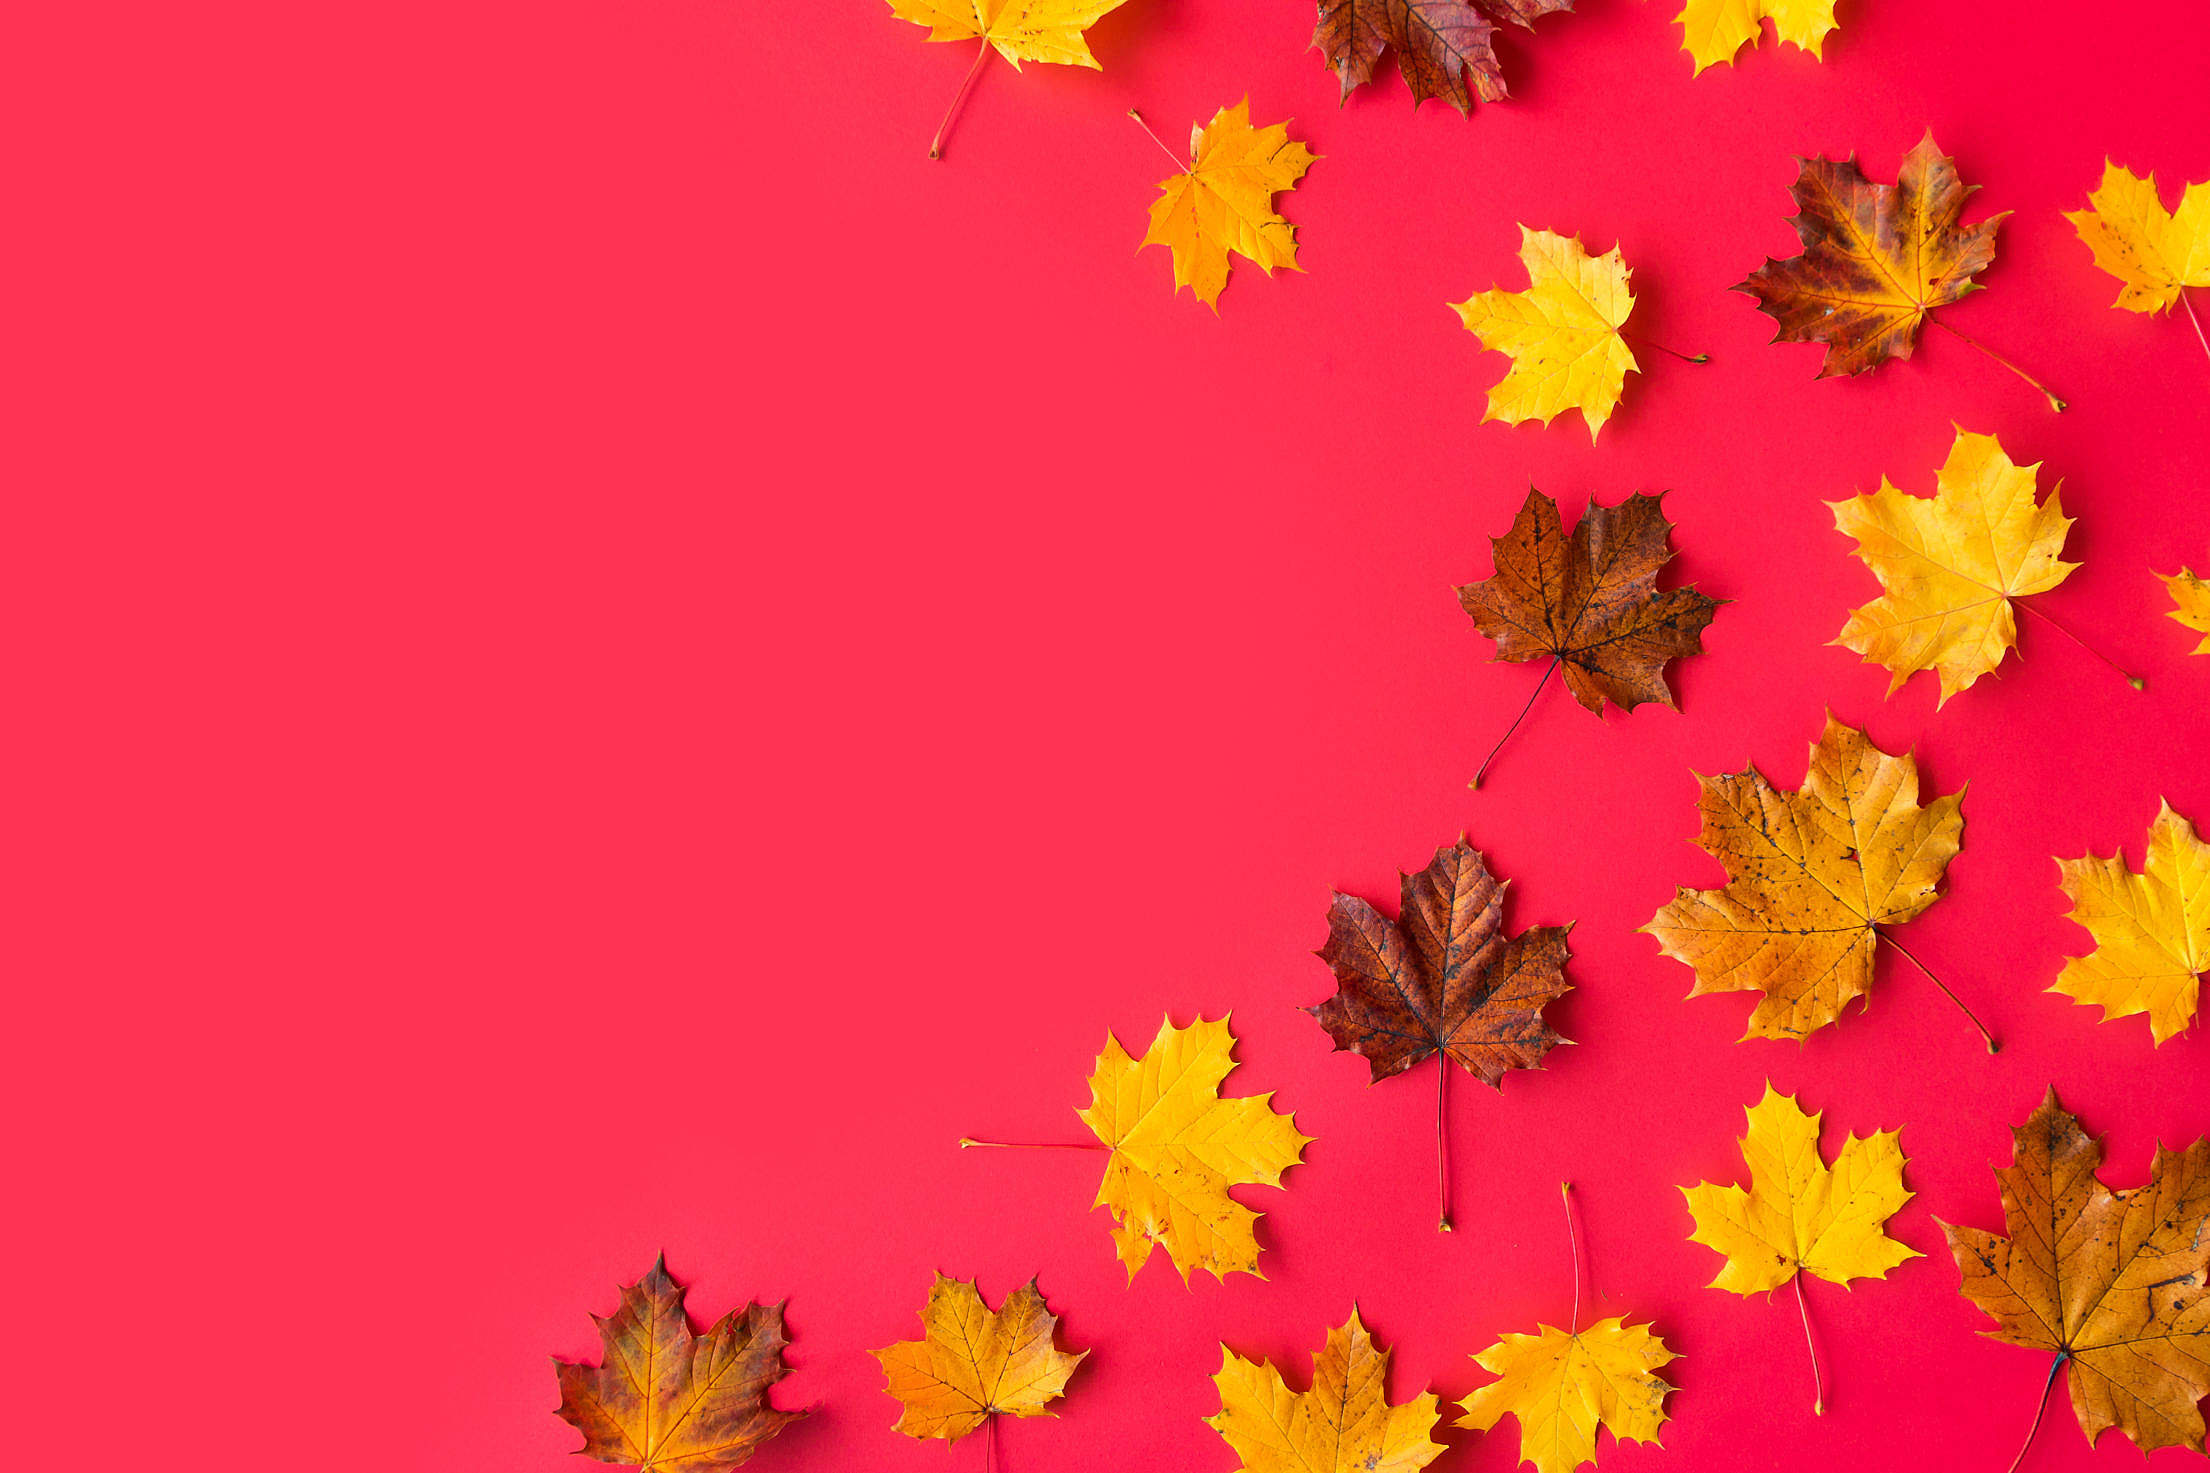 Autumn Leaves on Flat Red Background with Room for Text #2 Free ...